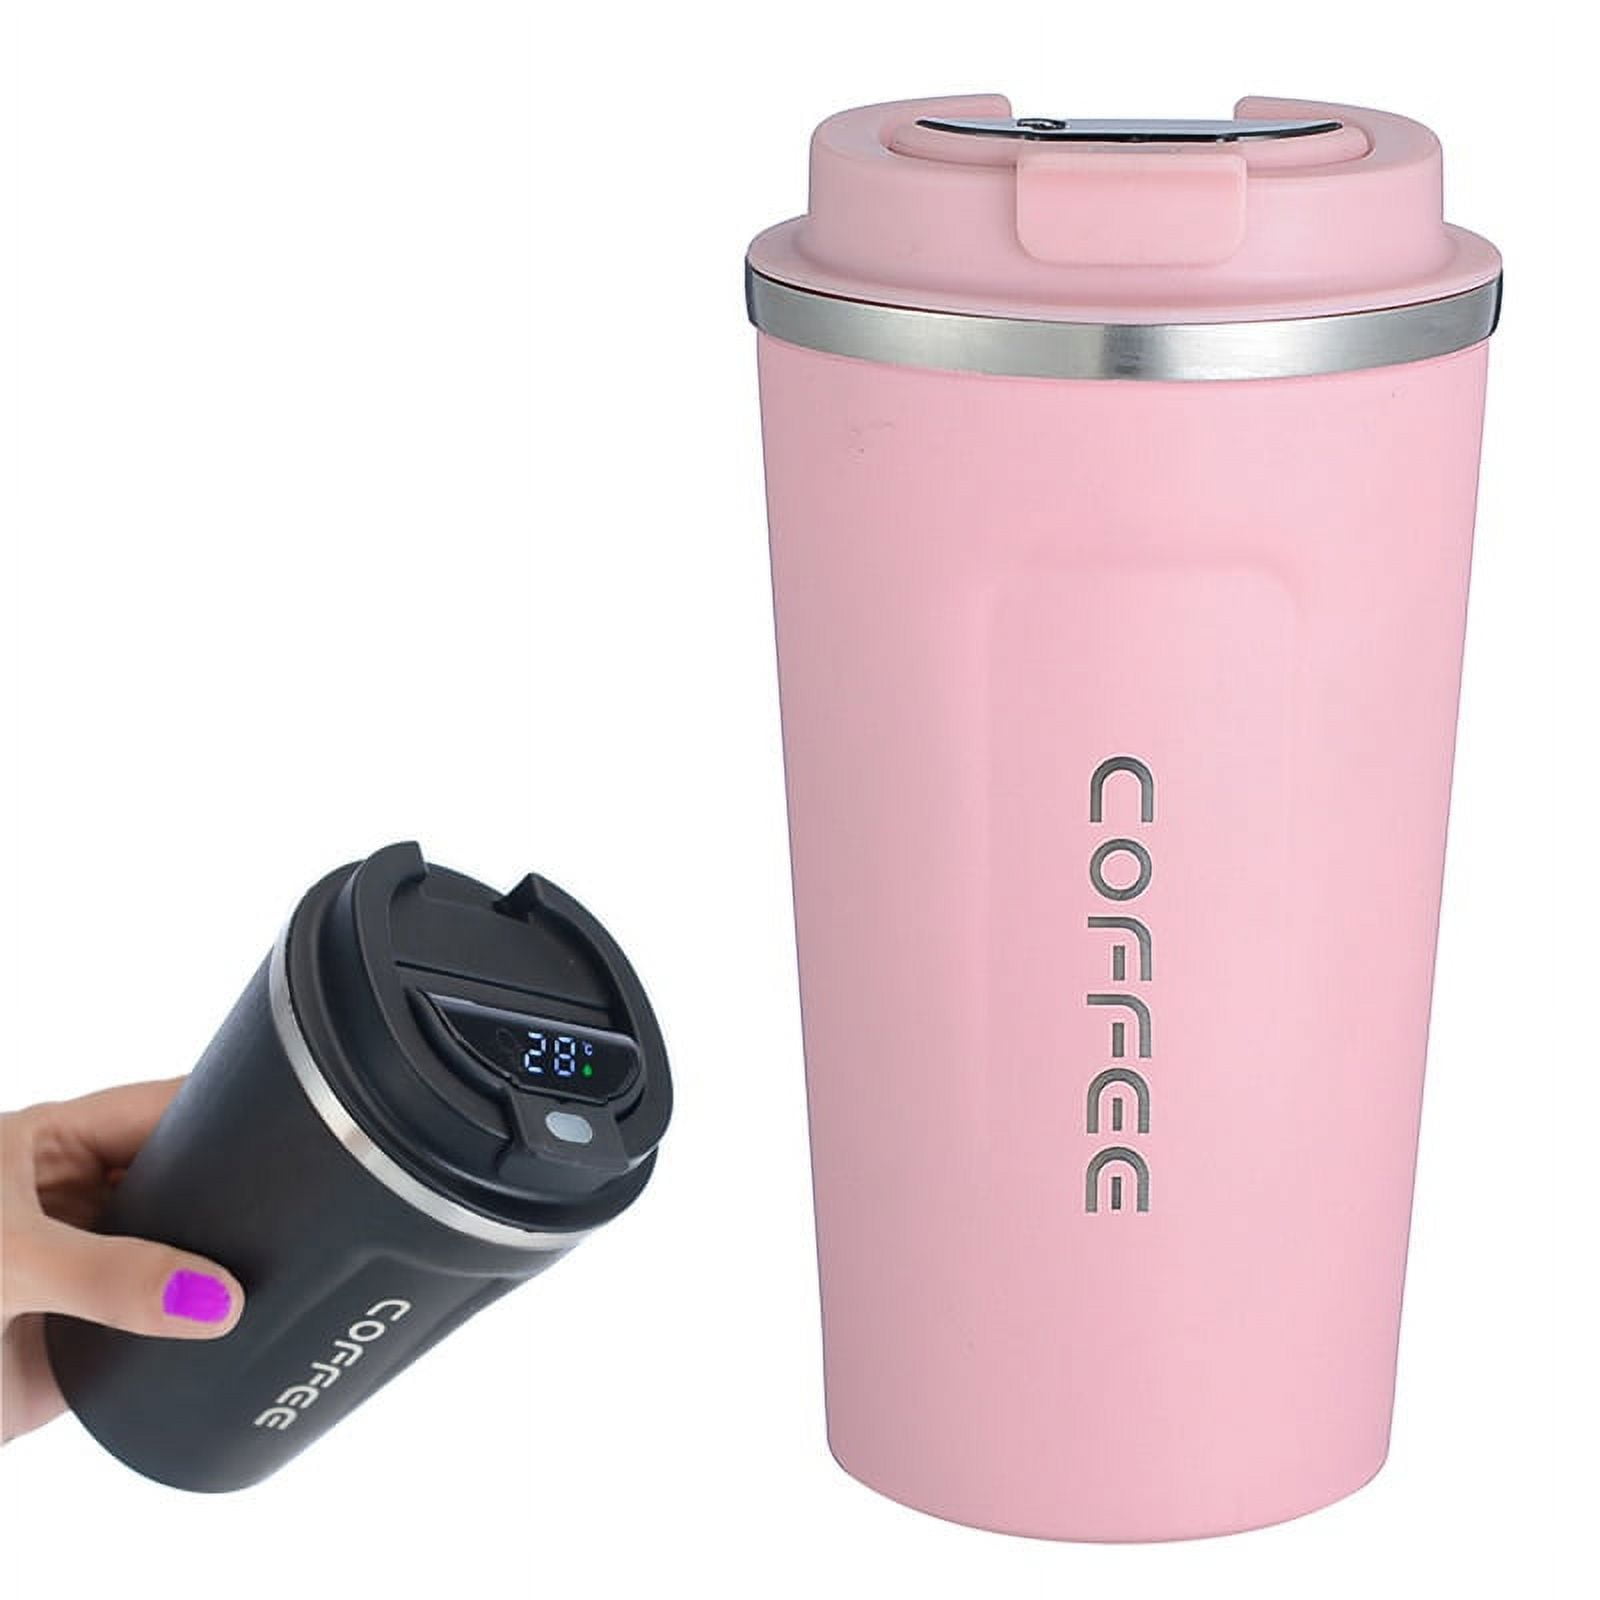 OROMYO 510ml Reusable Smart Coffee Cup with Temperature Display Stainless  Steel Travel Mugs for Hot and Cold Drinks Leakproof Insulation Tea Cups  Bottle for Camping Travel 